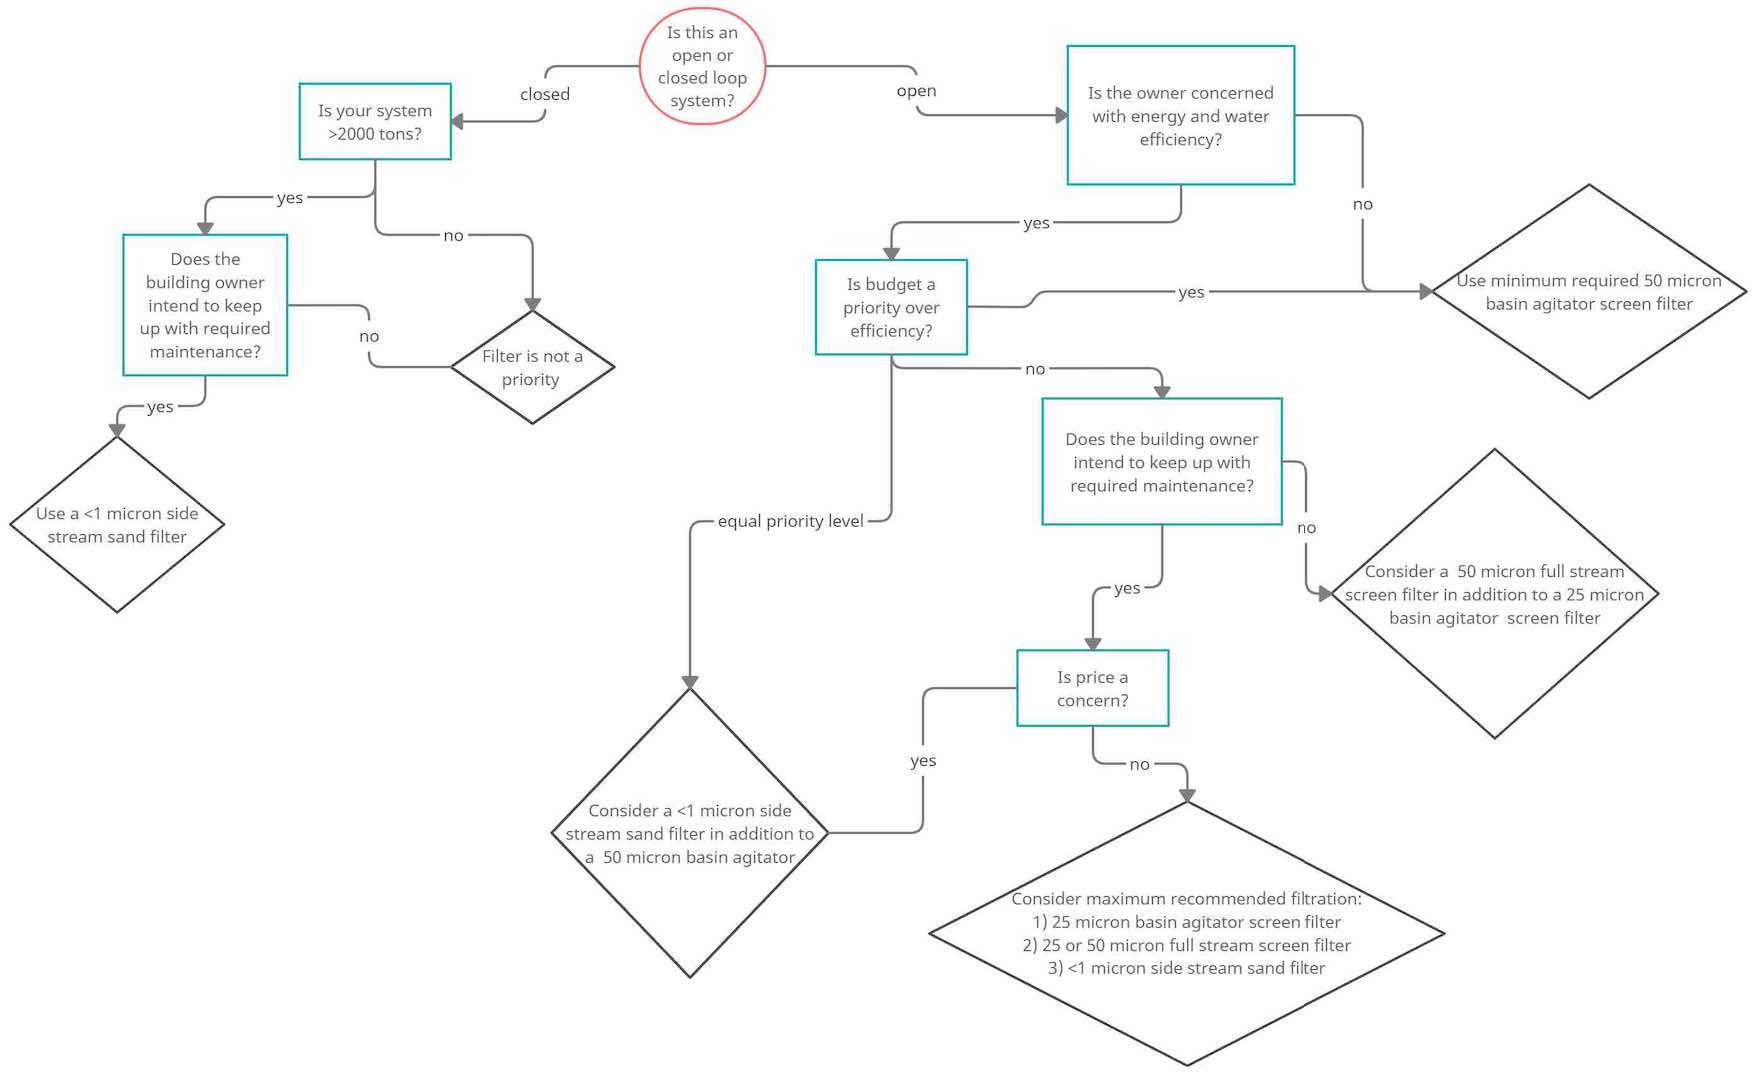 Use this water-filtration decision tree to determine which system is best for you